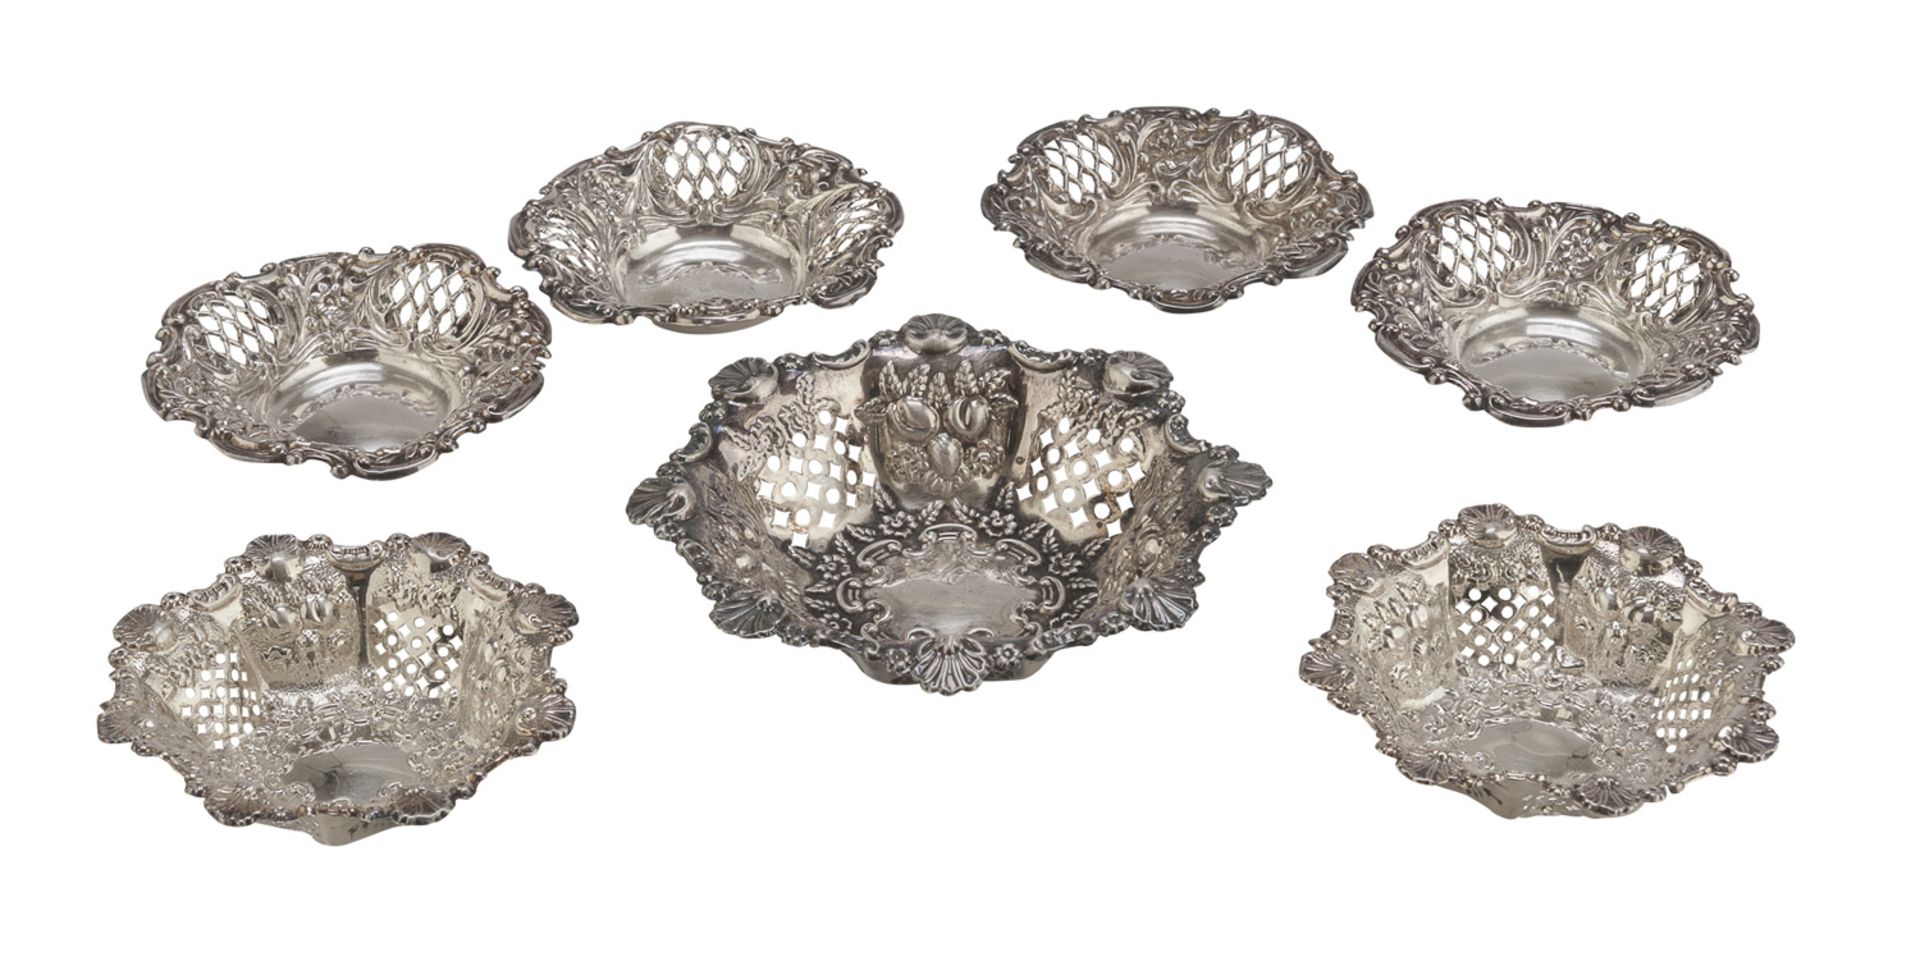 SEVEN SILVER TRAYS PROBABLY ITALY EARLY 20TH CENTURY